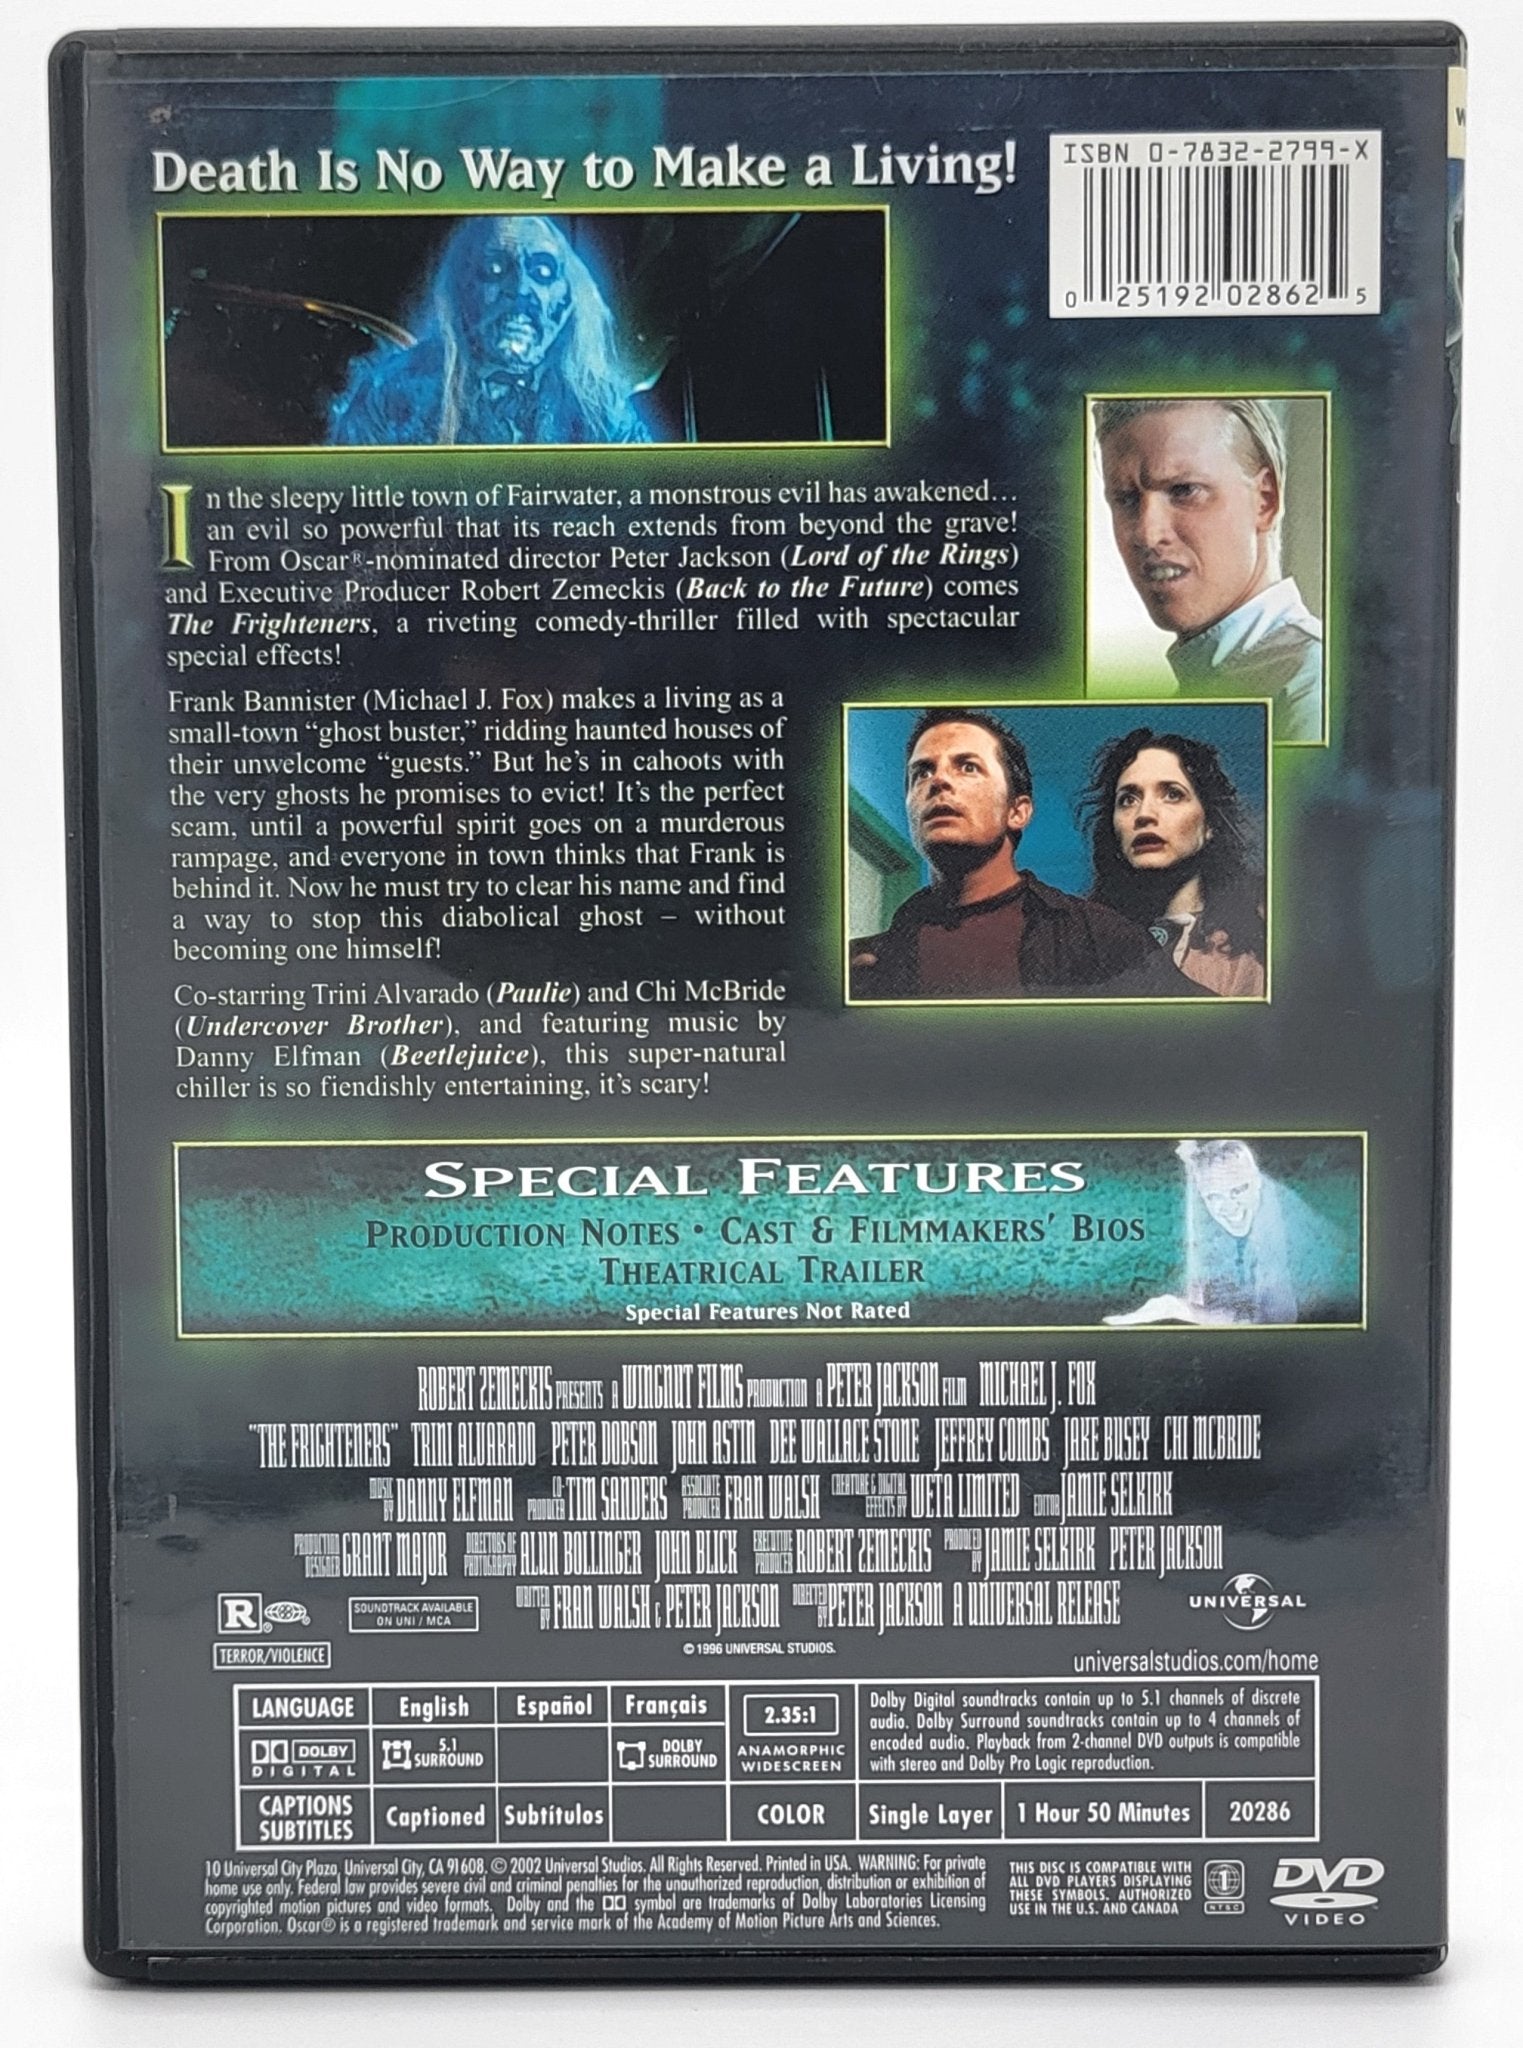 ‎ Universal Pictures Home Entertainment - The Frighteners | DVD | Widescreen - DVD - Steady Bunny Shop